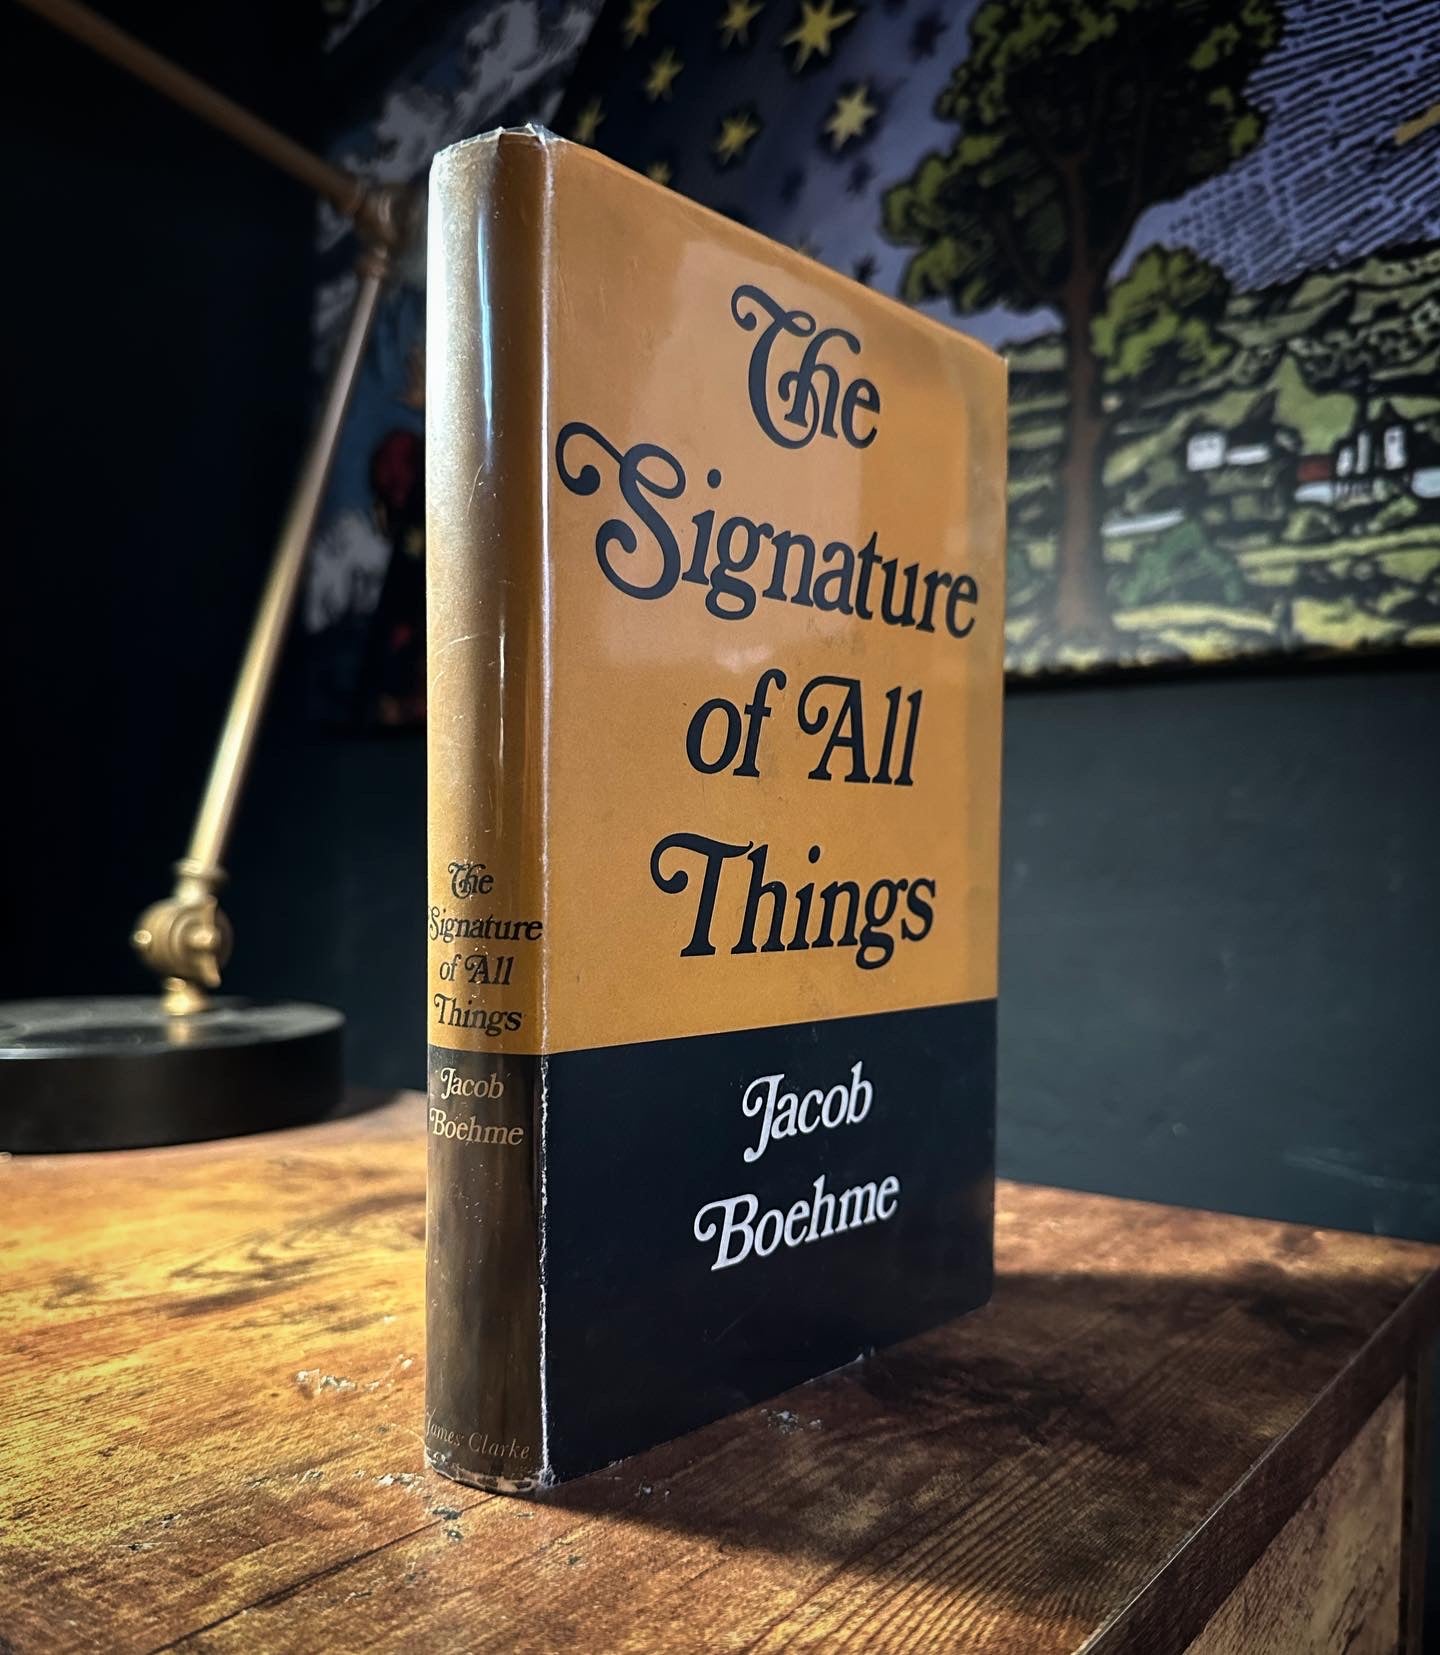 The Signature of All Things by Jacob Boehme